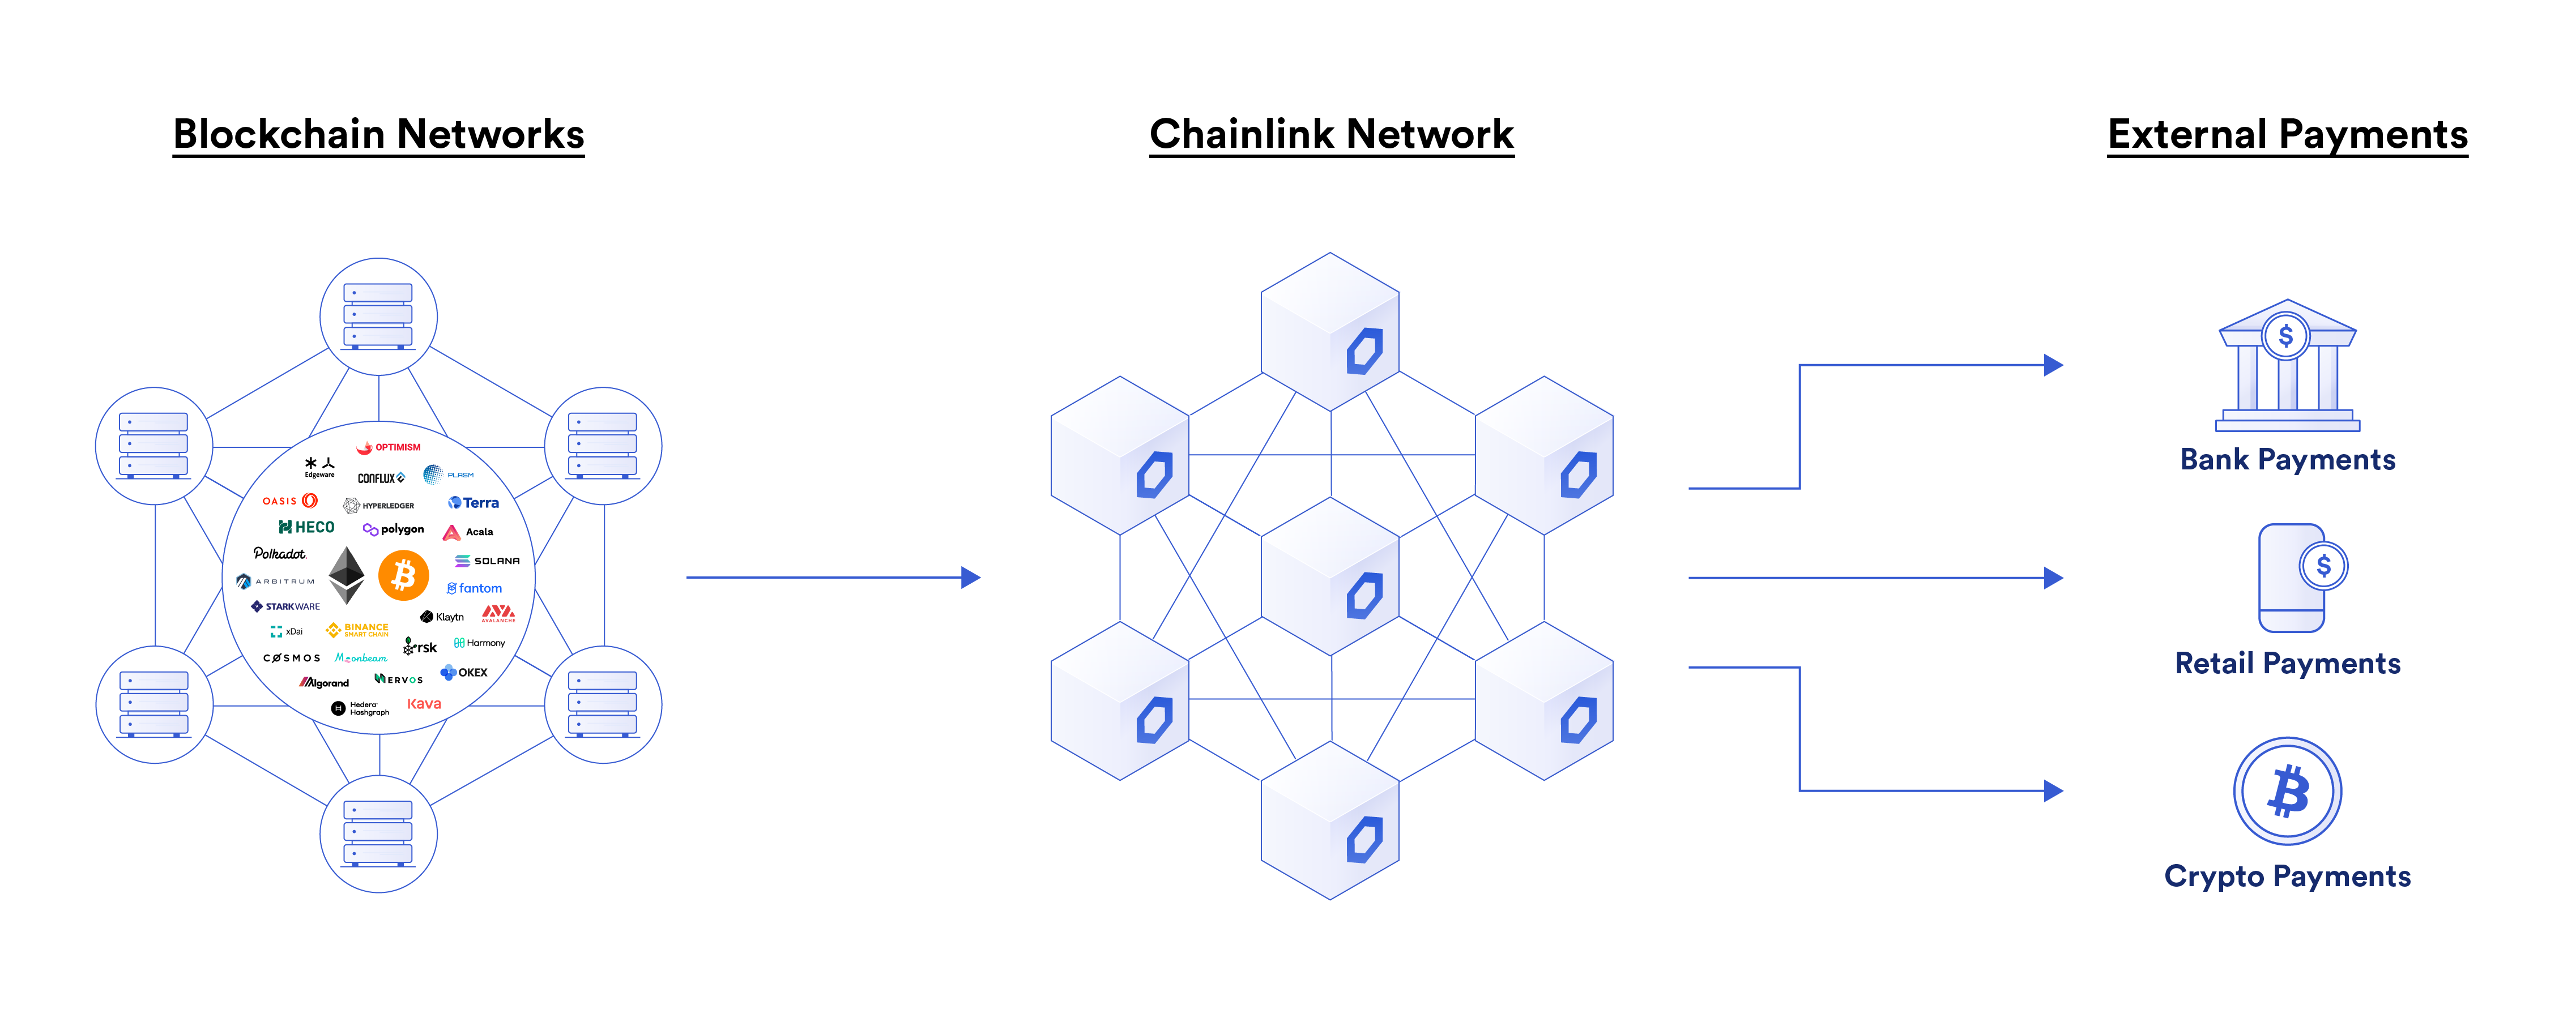 Chainlink Payments